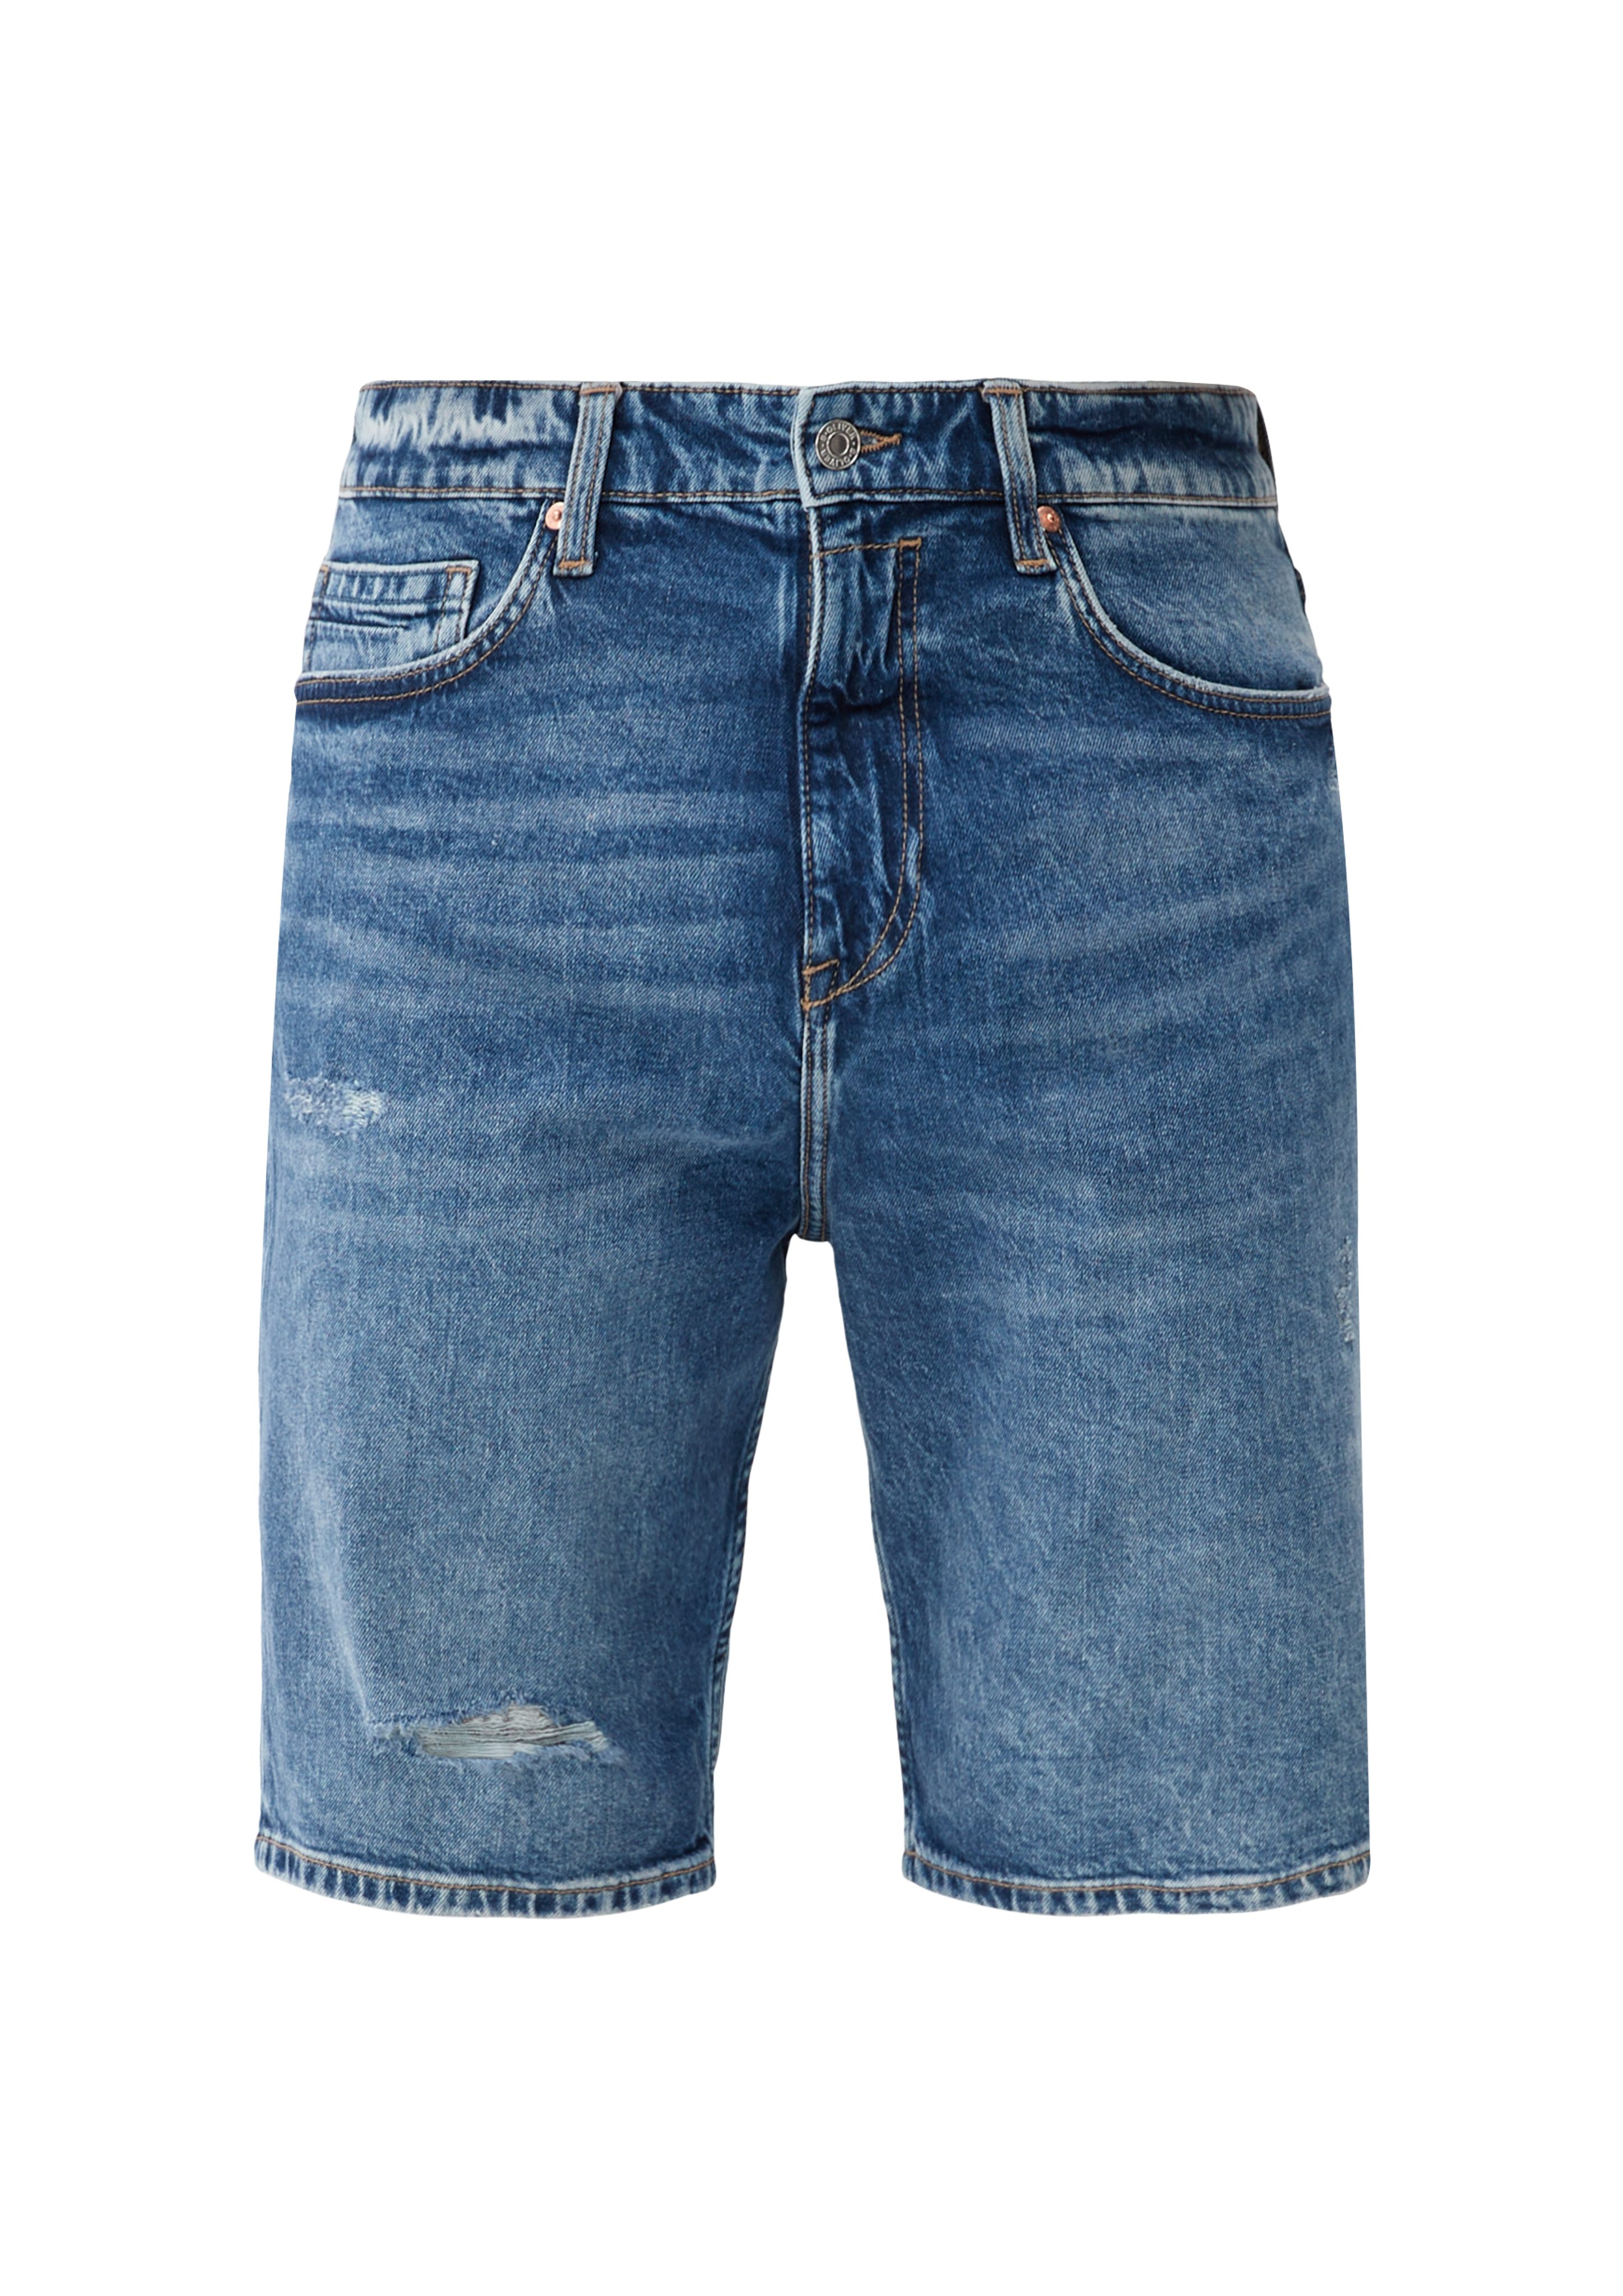 s.Oliver Jeansshorts Jeans-Shorts / Fit Mid Rise / Relaxed Waschung, Destroyes